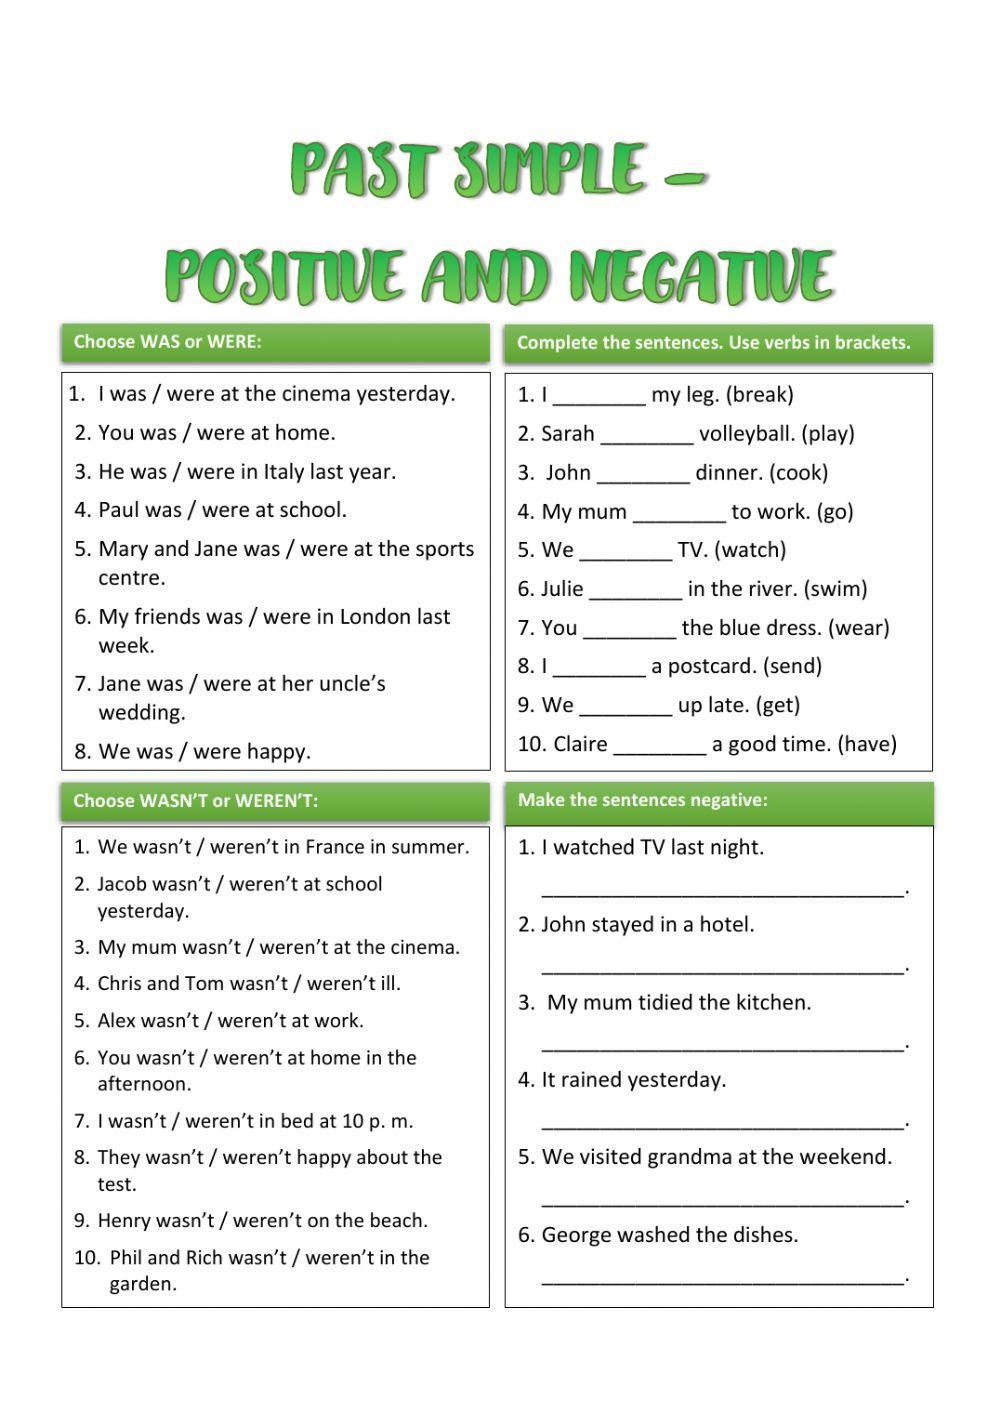 Past simple positive and negative